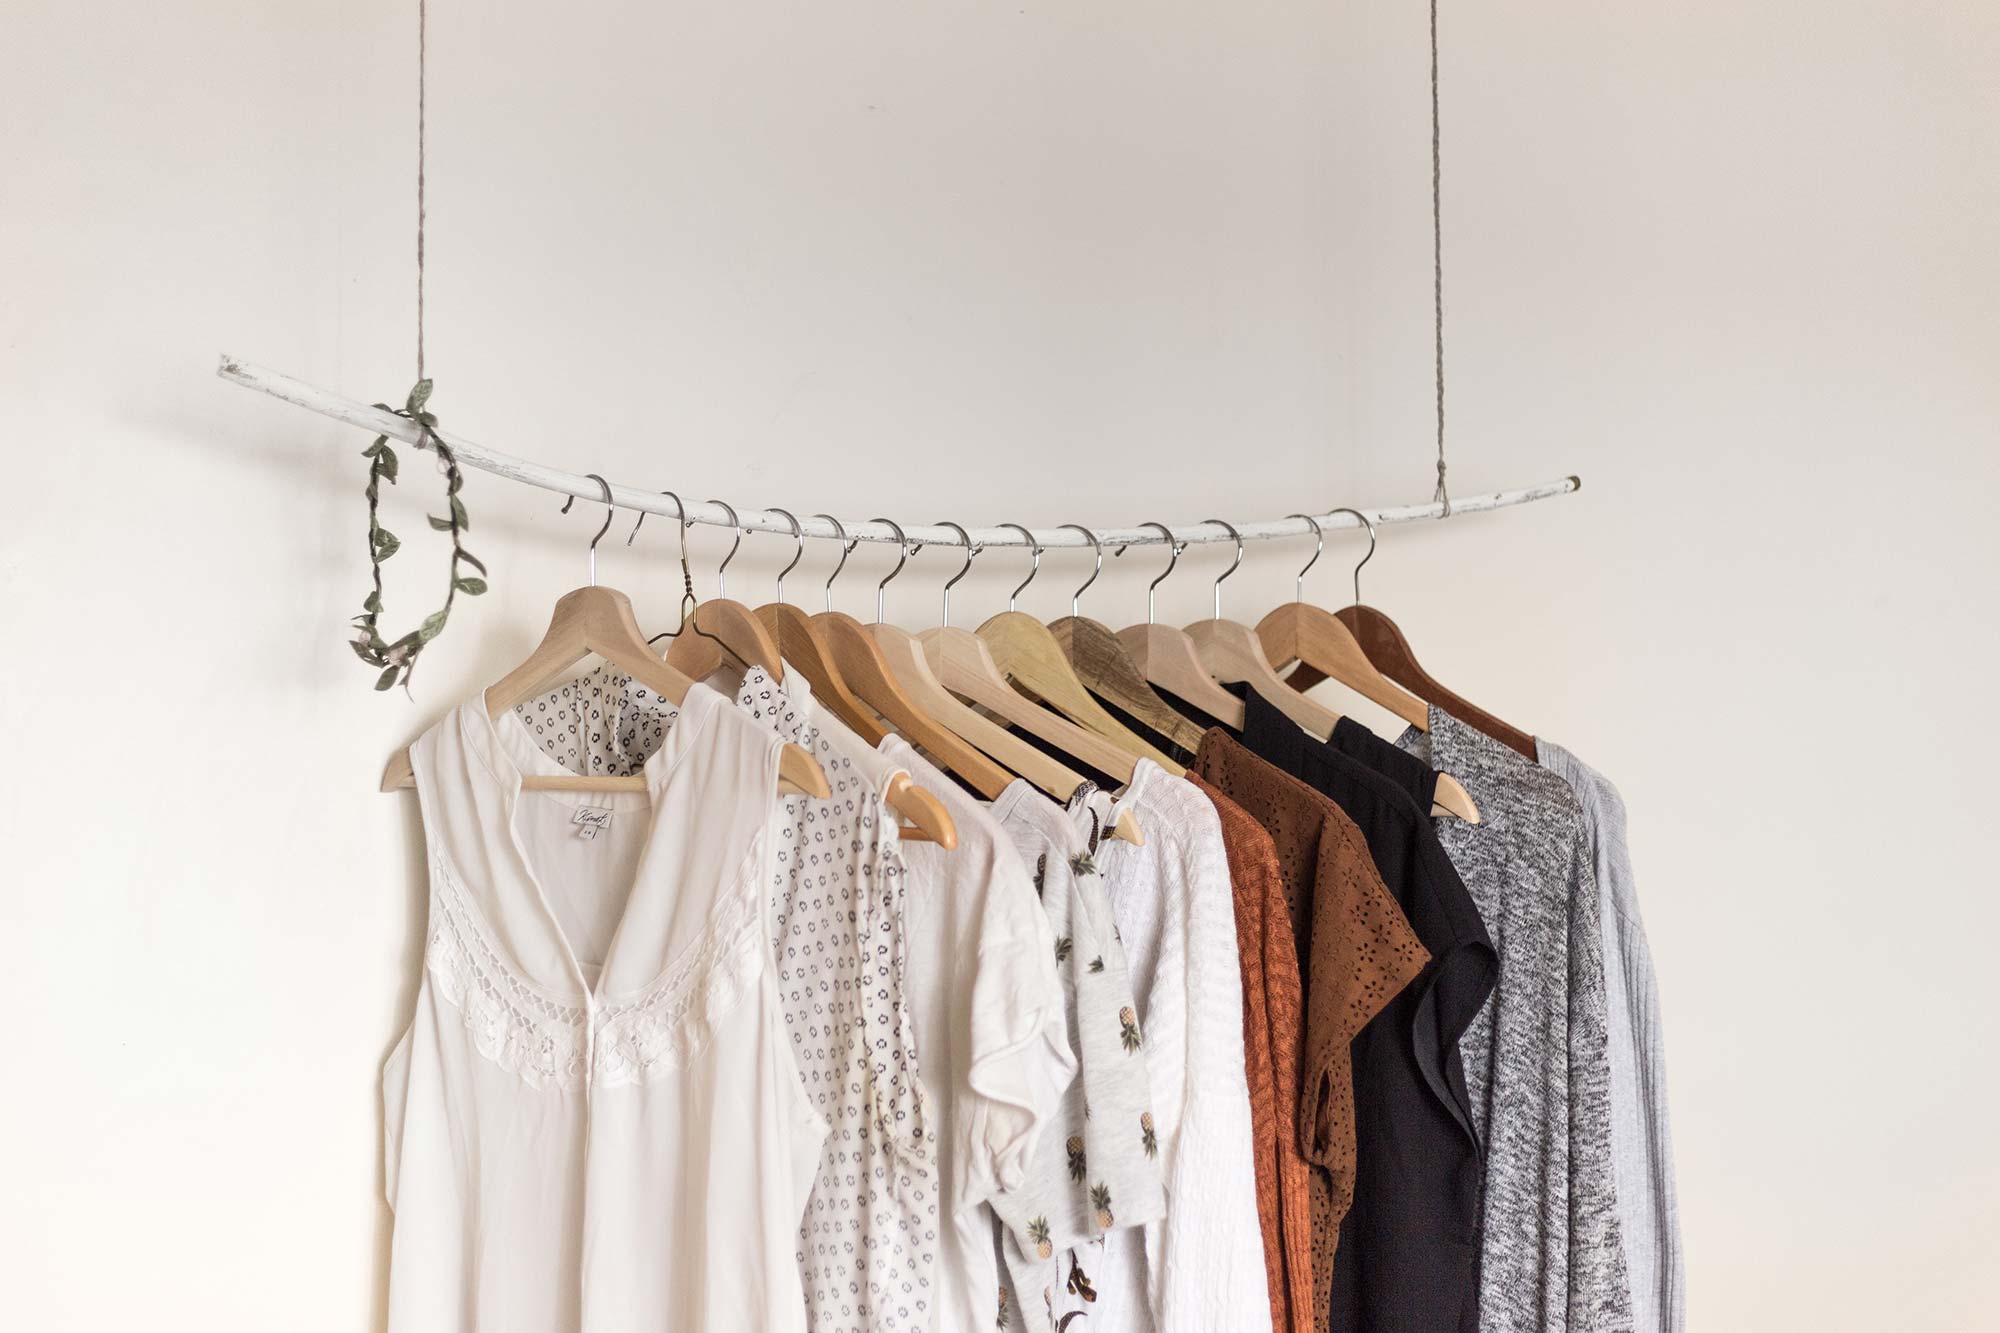 Shopping Tips: Clothes and Sustainability